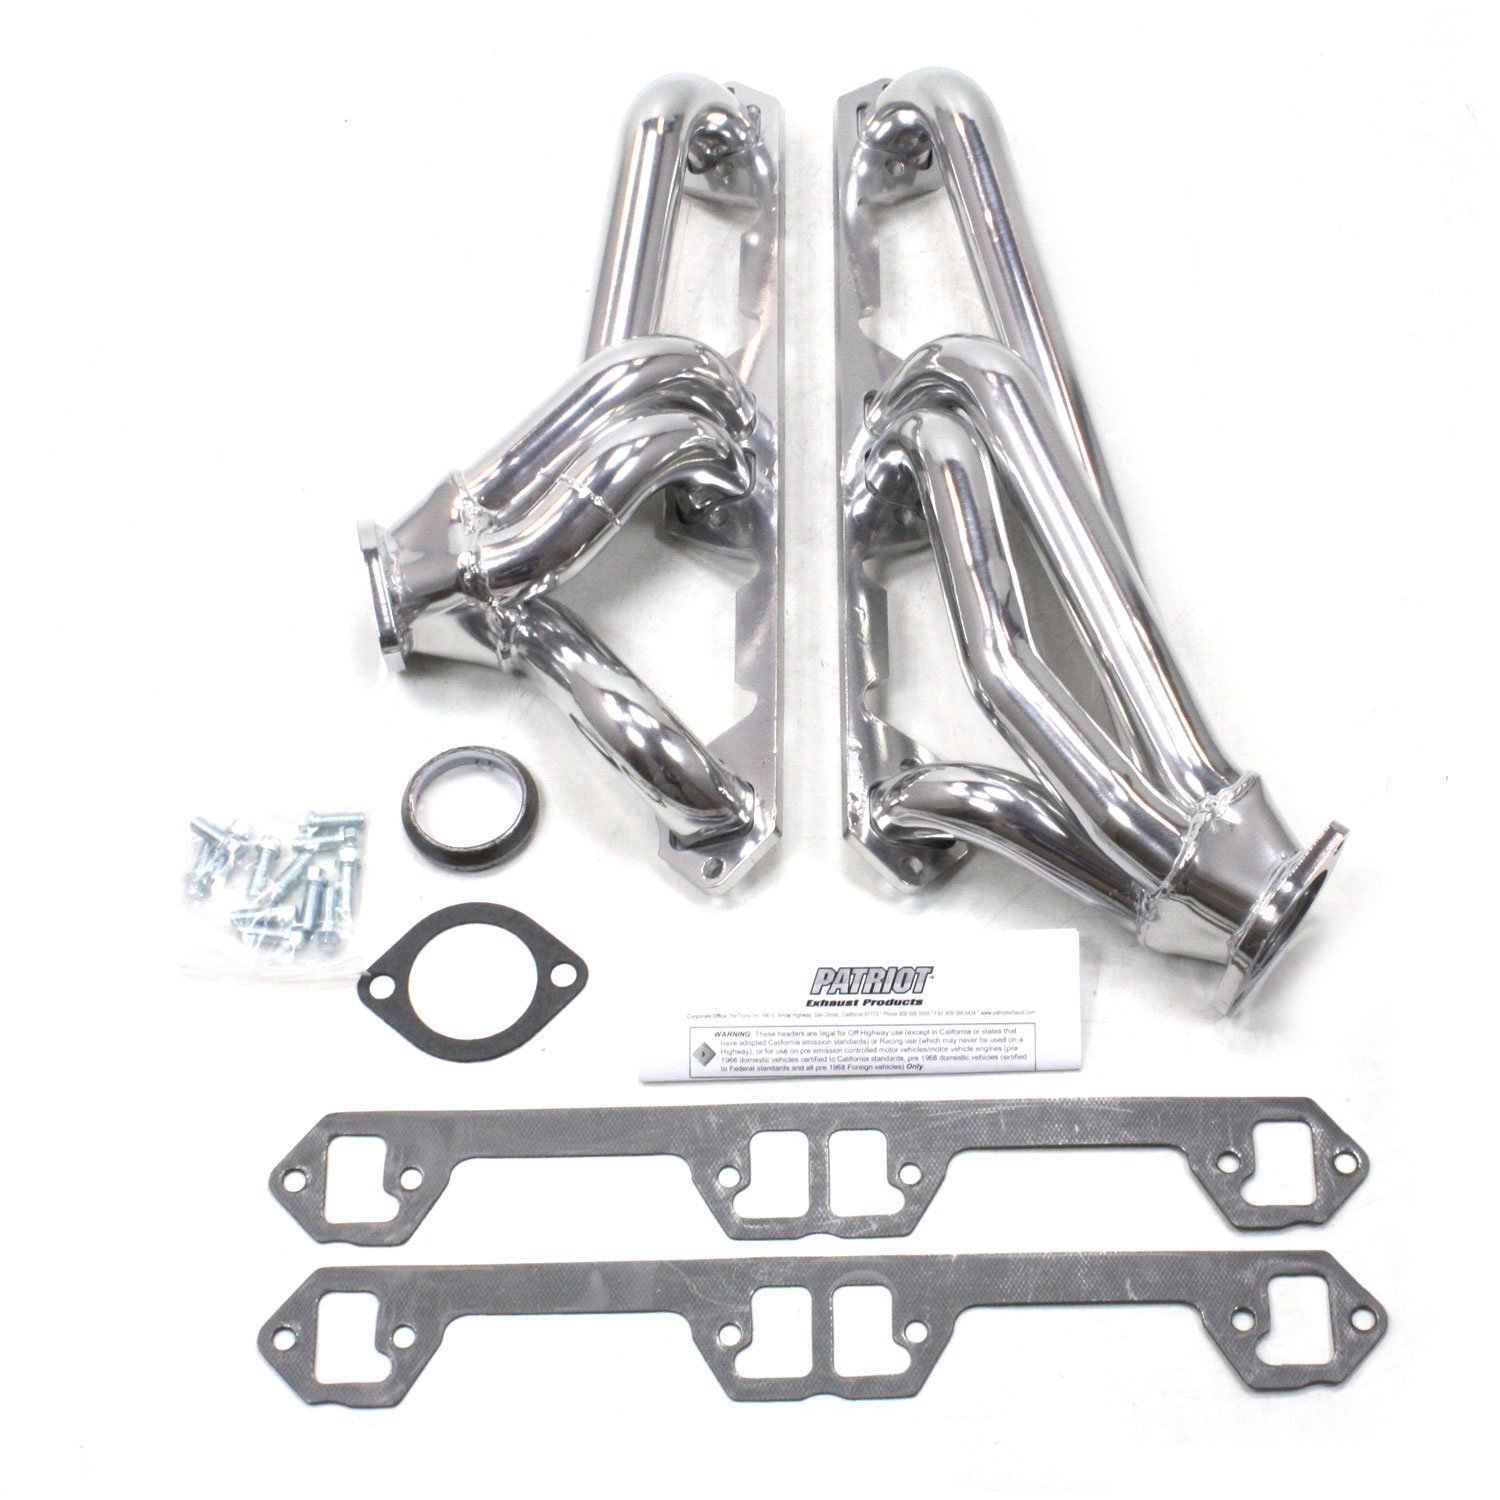 H8600-1 AMC/Jeep Specific Fit Headers 290-401 1-5/8"